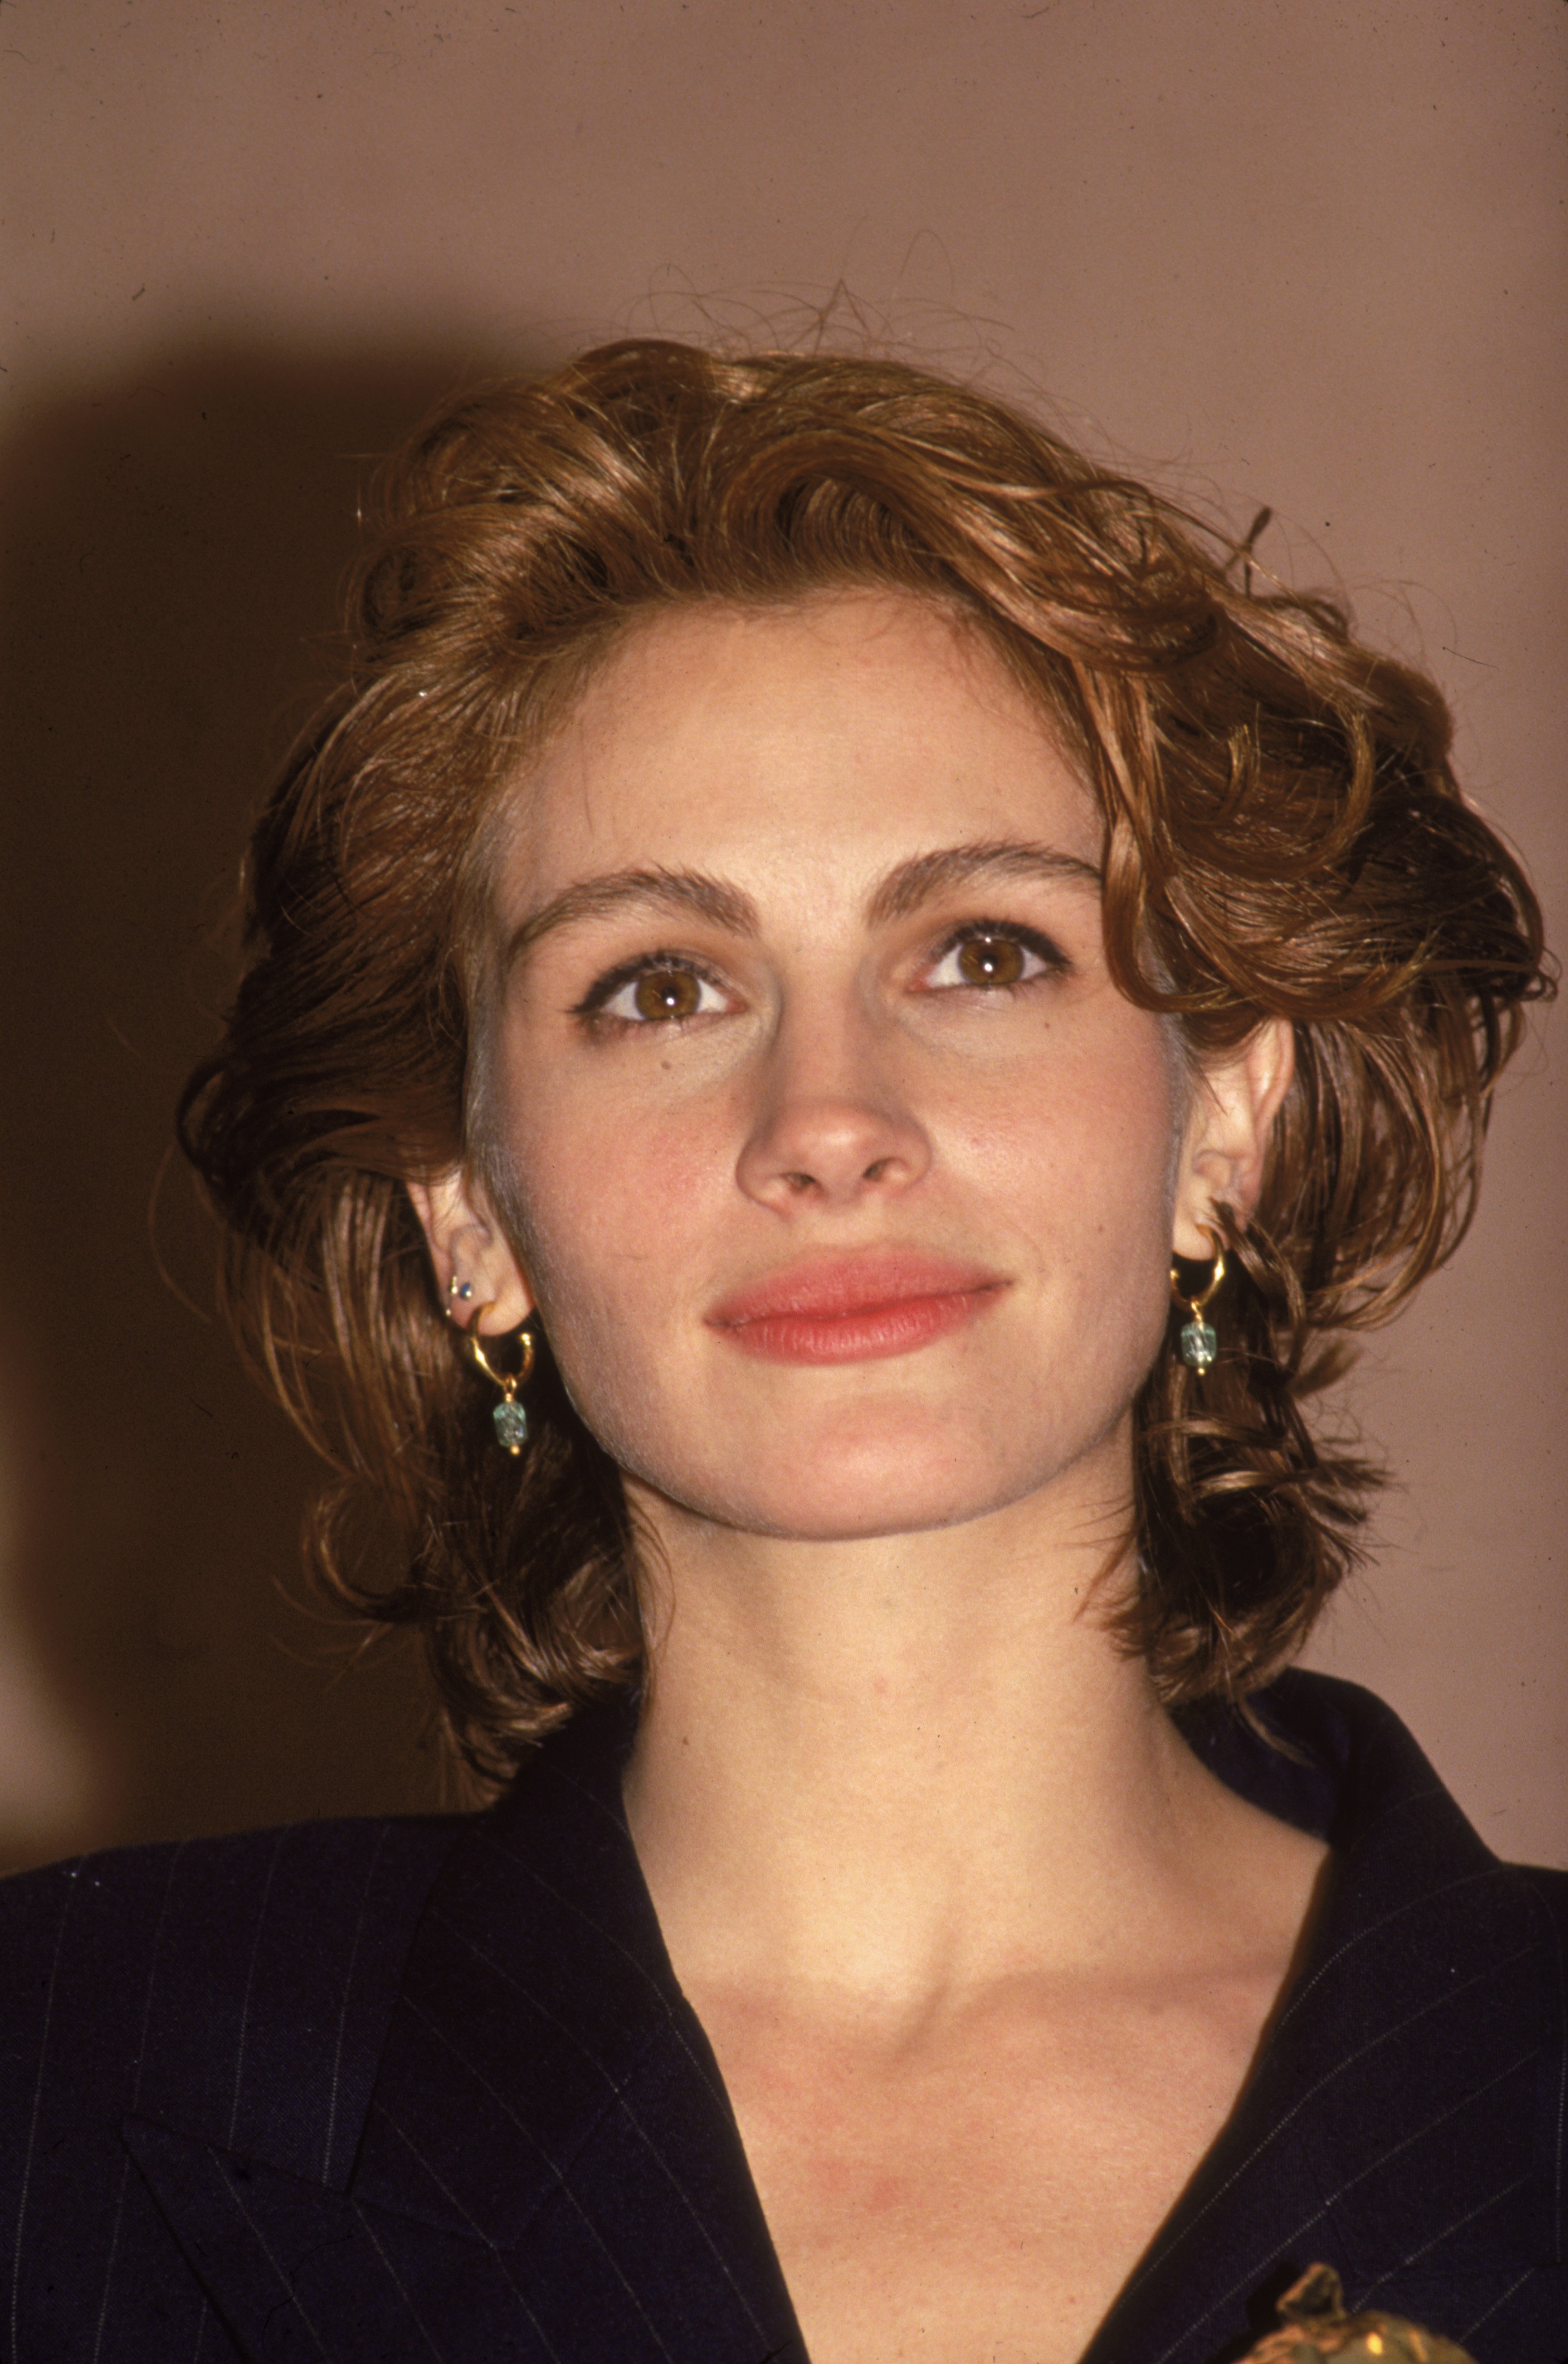 American actress Julia Roberts at the 48th Annual Golden Globe Awards, held at the Beverly Hilton Hotel, Beverly Hills, California, January 19, 1991. | Source: Getty Images